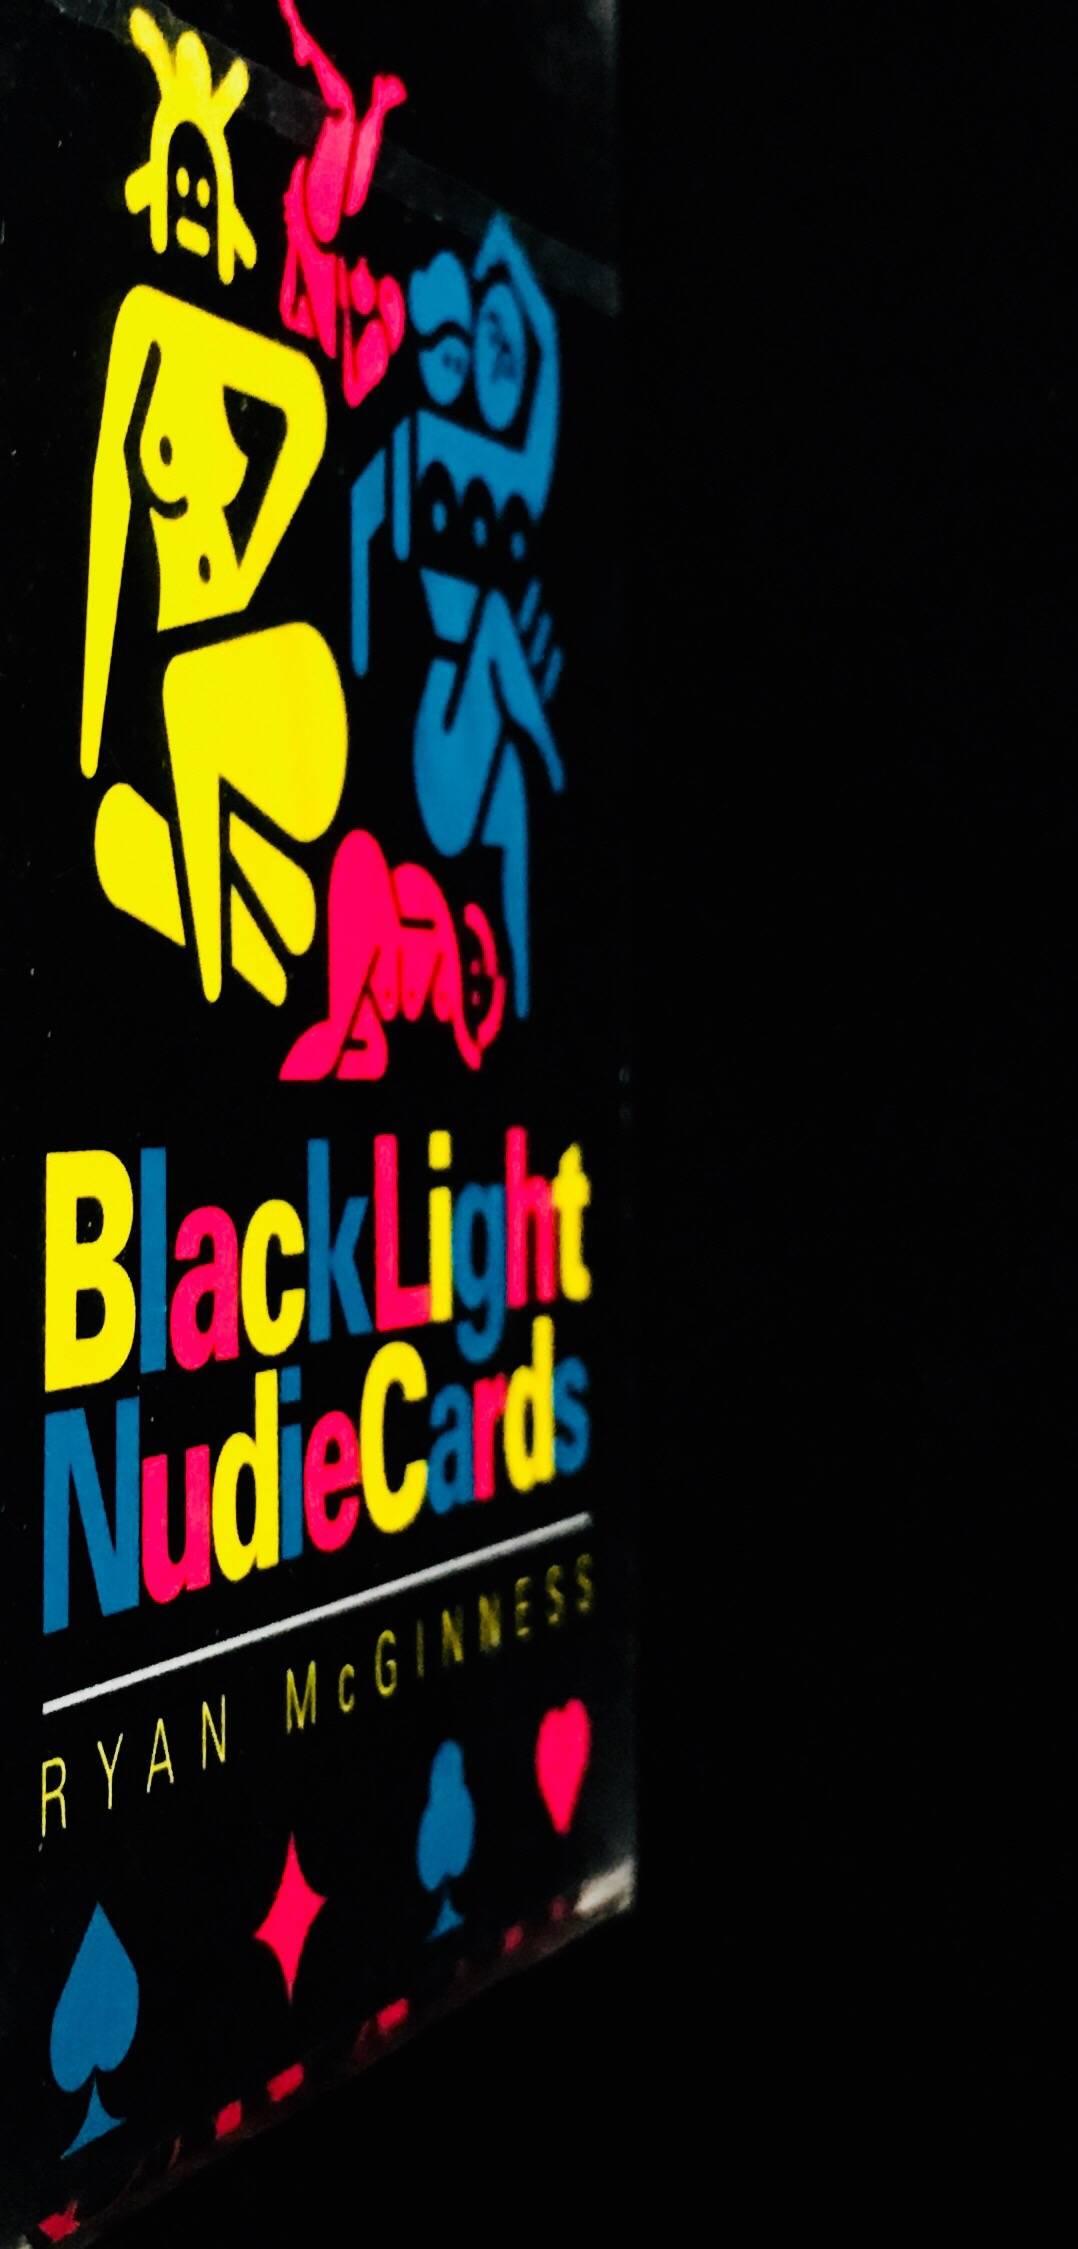 These Blacklight Nudie Cards feature iconic drawings that were developed from Ryan McGinness' figure studies of various models.

The deck of cards, produced exclusively for The Standard Hotel, mimic stag party cards as filtered through McGinness’